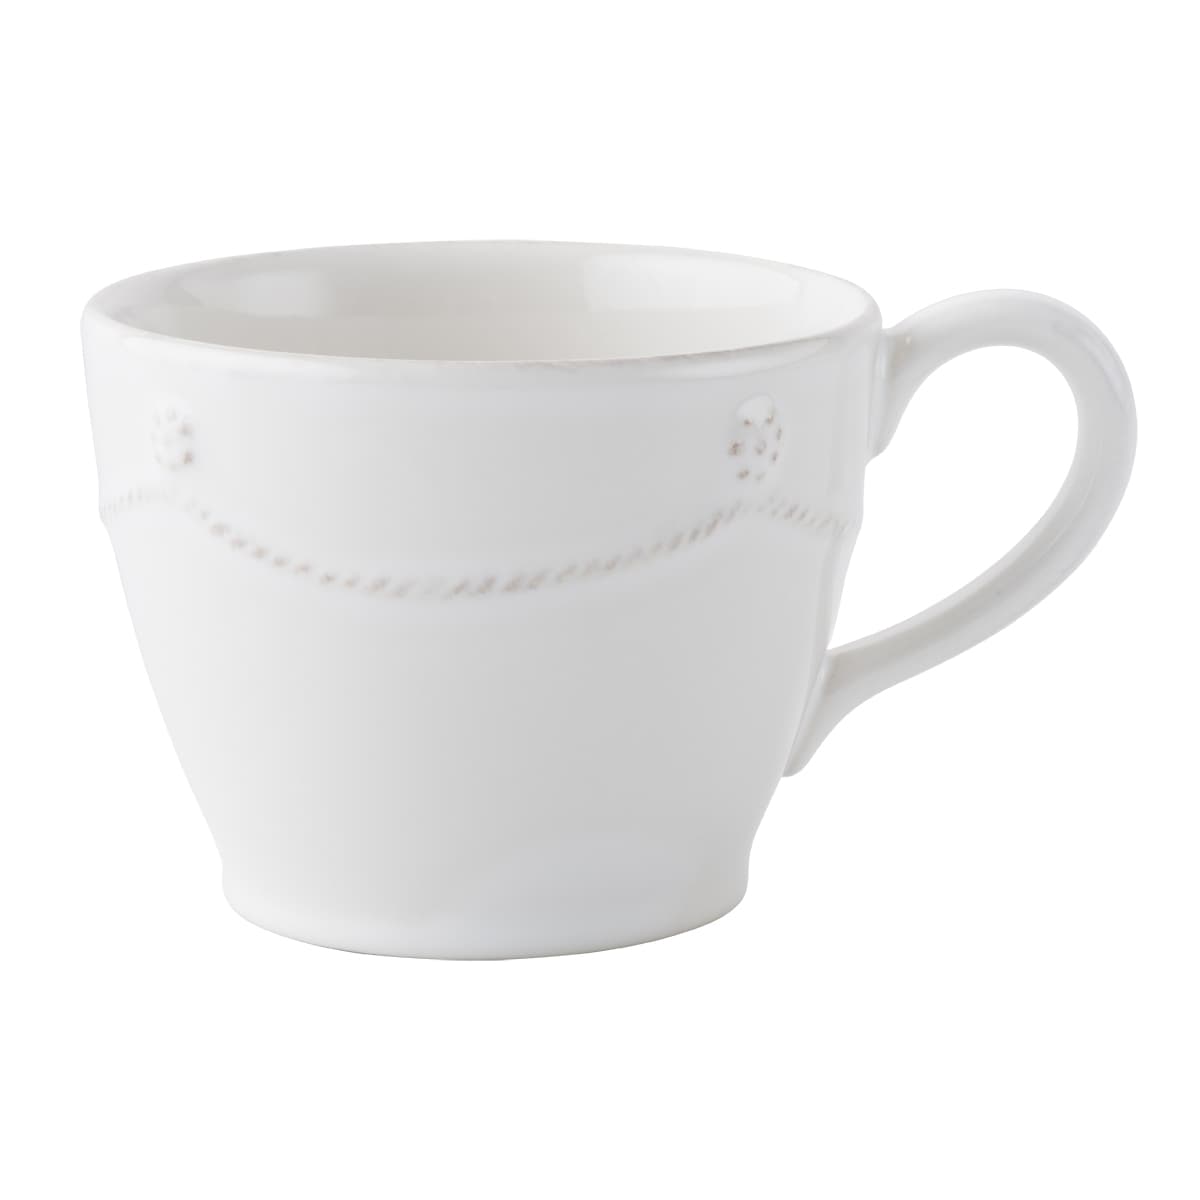 A sweet addition to our Berry & Thread family and your warm beverage cabinets, this whitewash cup is romantically detailed and ready for your morning routine or afternoon coffee or tea.